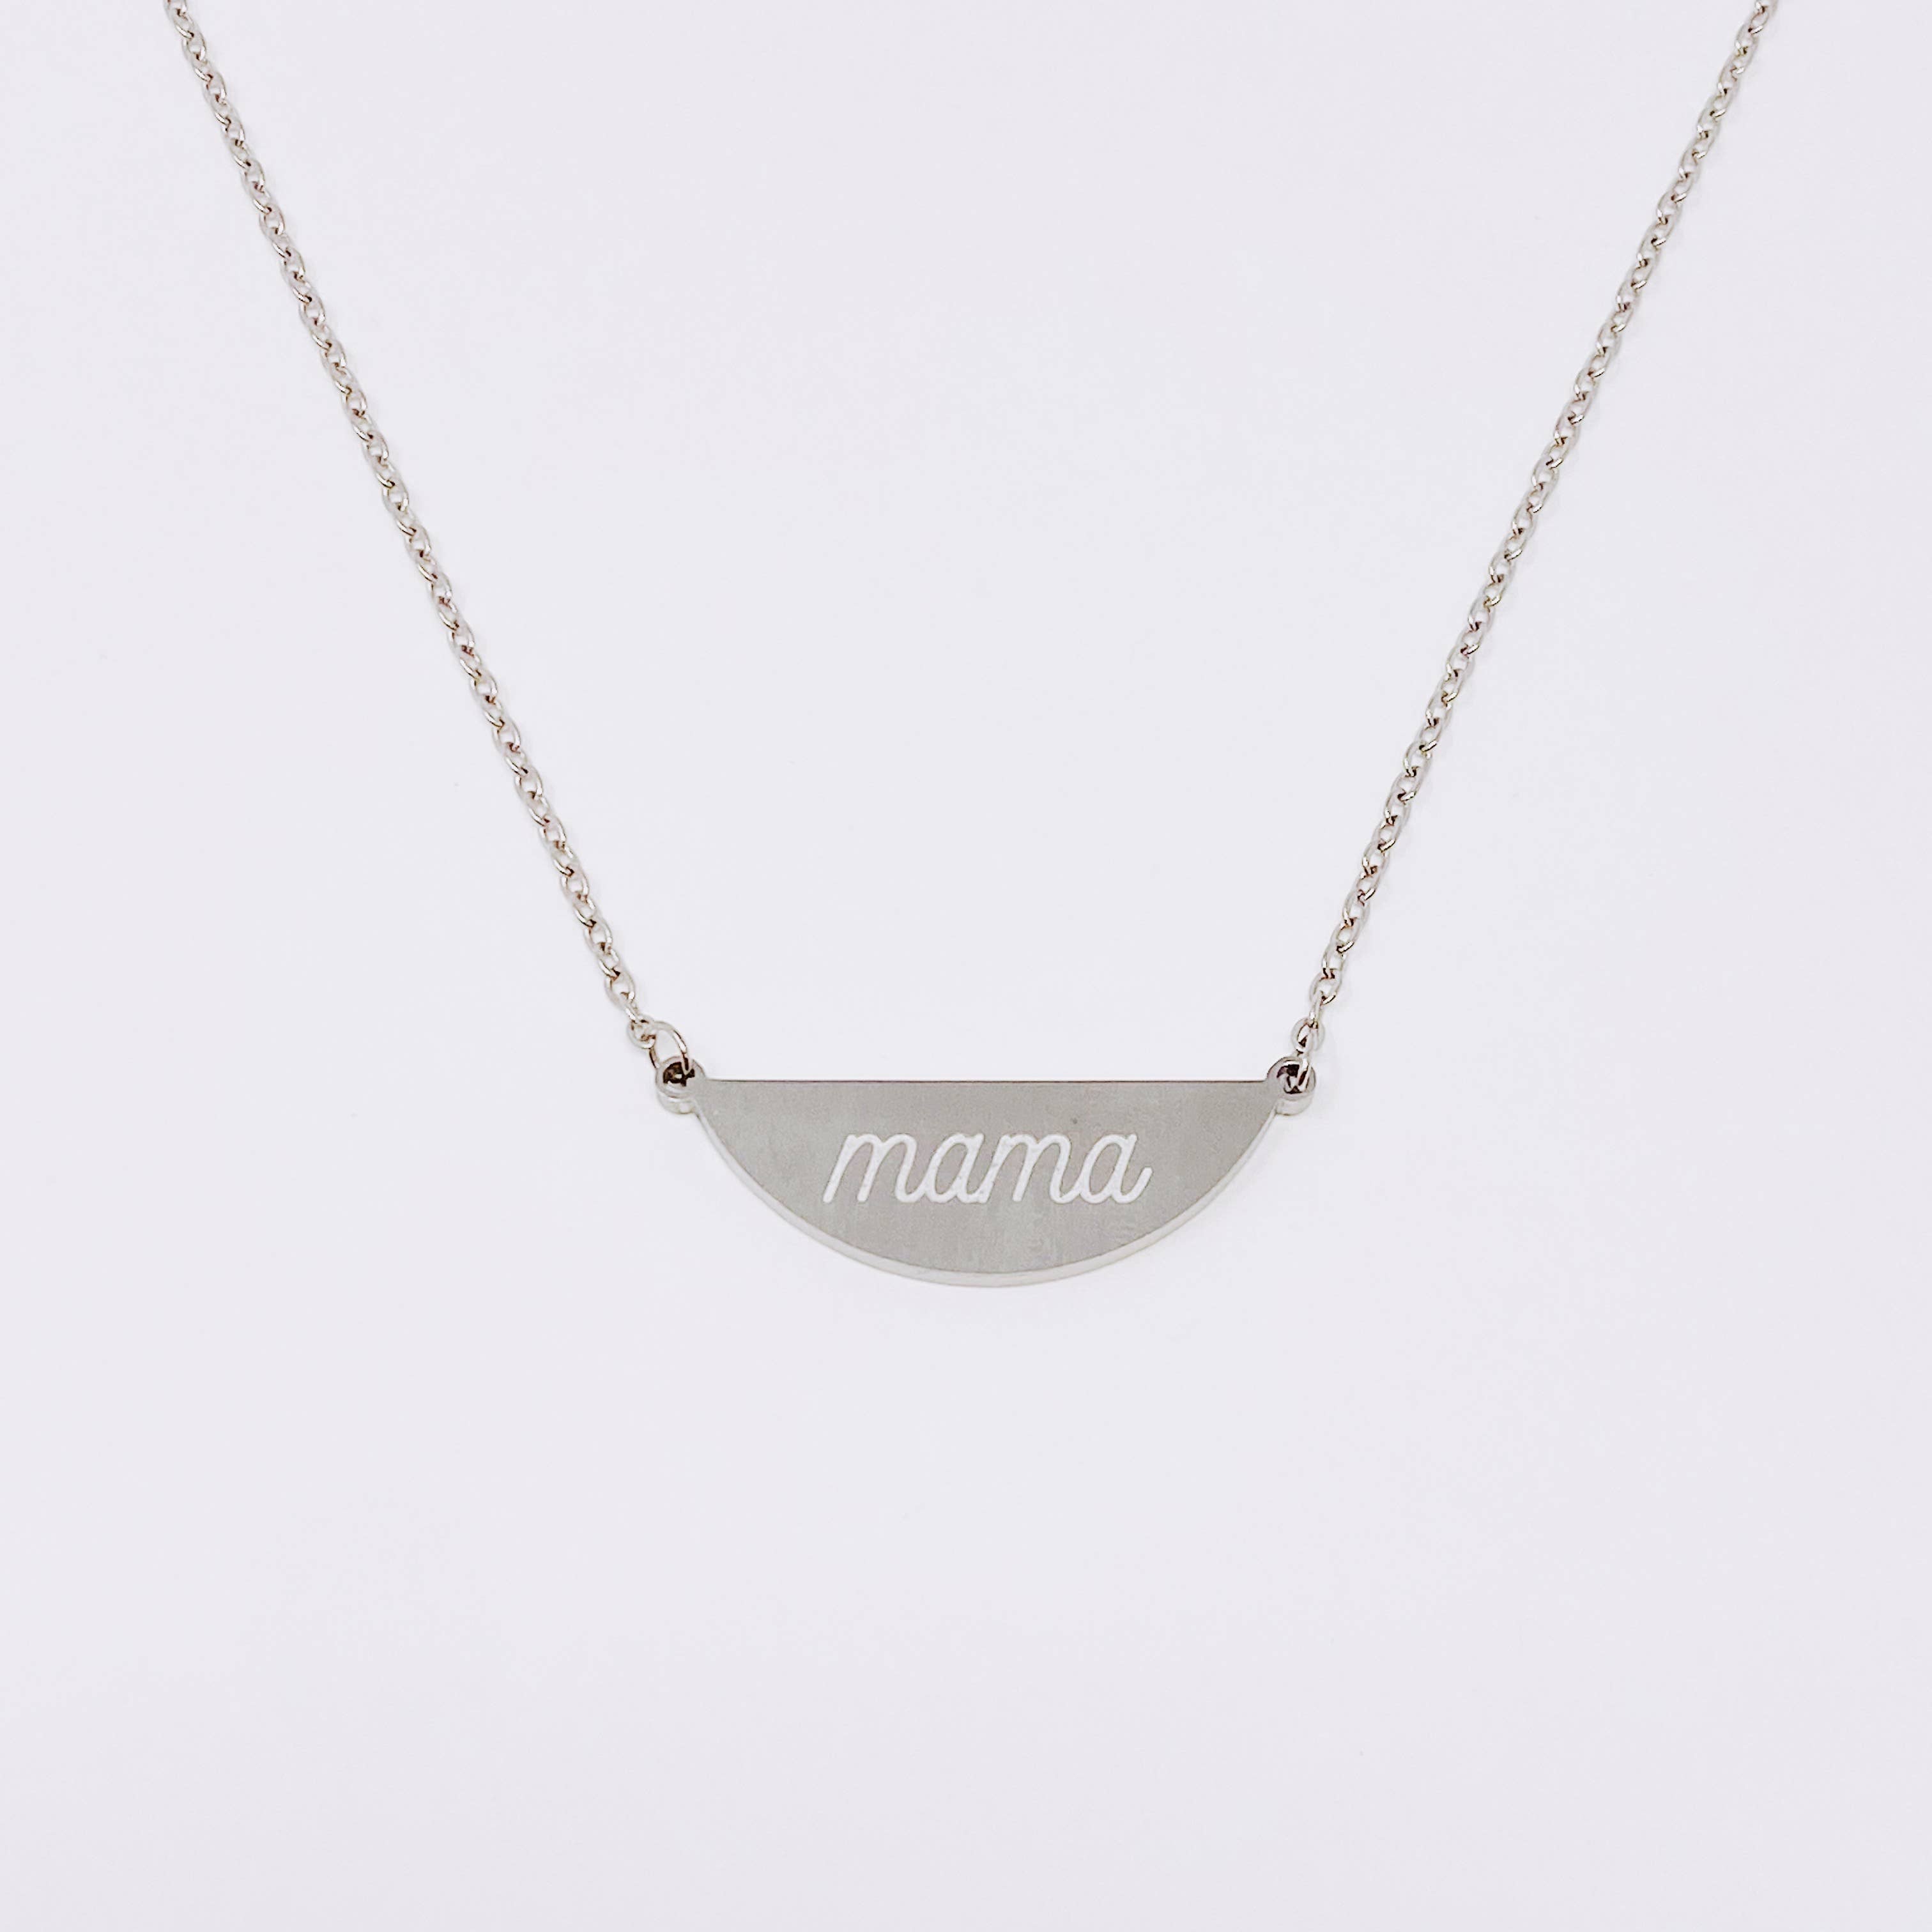 Mama Necklace Sterling Silver Artisan Cast Retro Style Mom Jewelry – River  Valley Designs